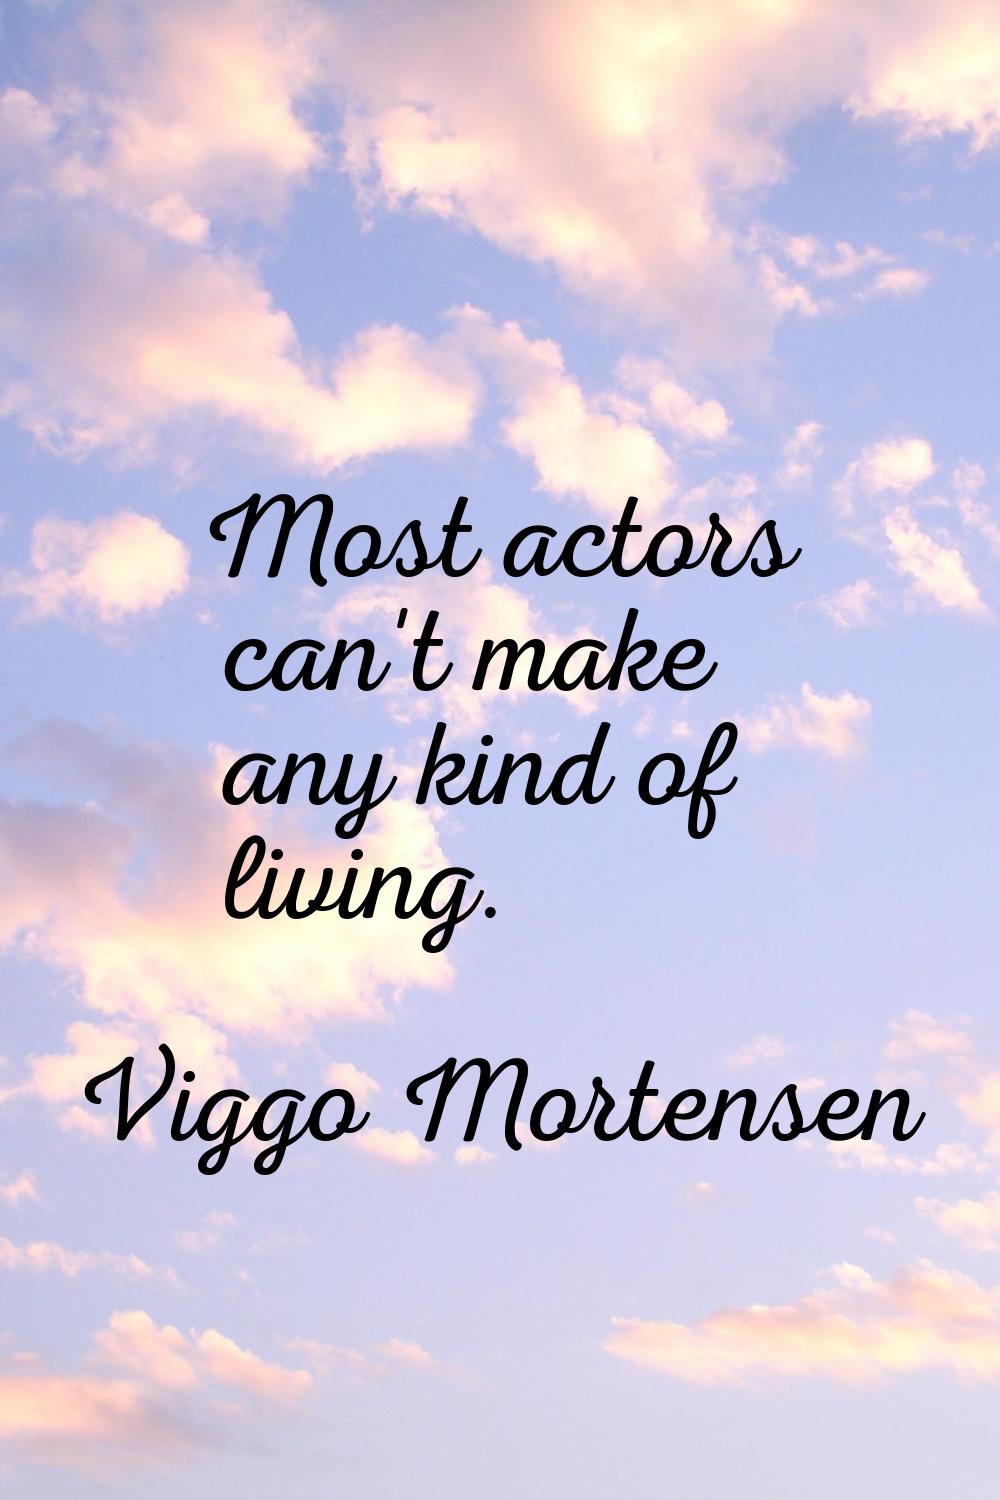 Most actors can't make any kind of living.